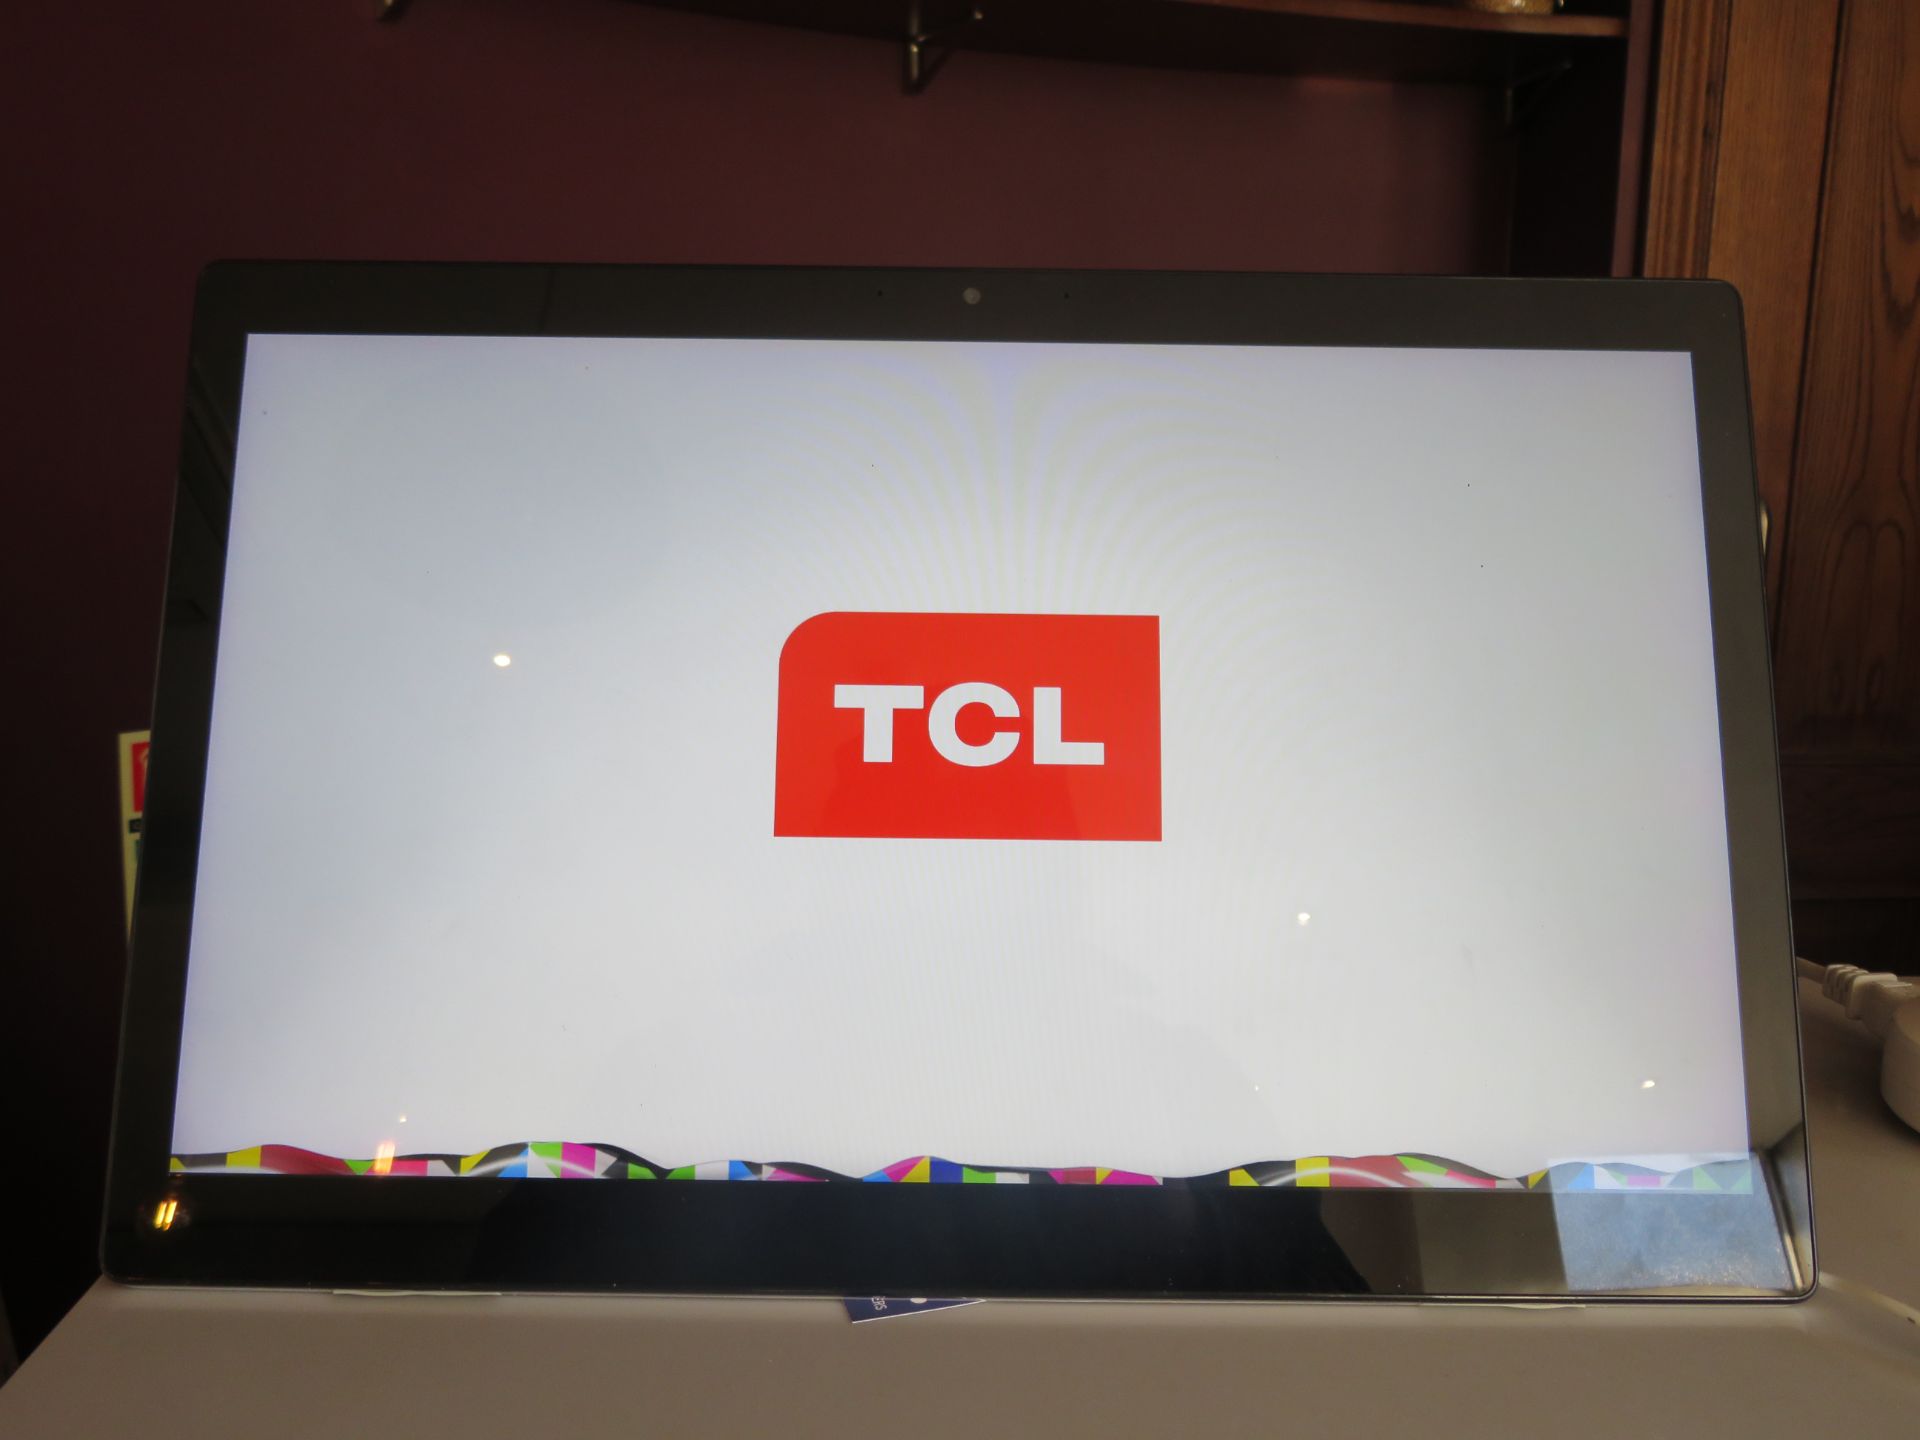 TCL Computer Tablet (17") - Image 2 of 3